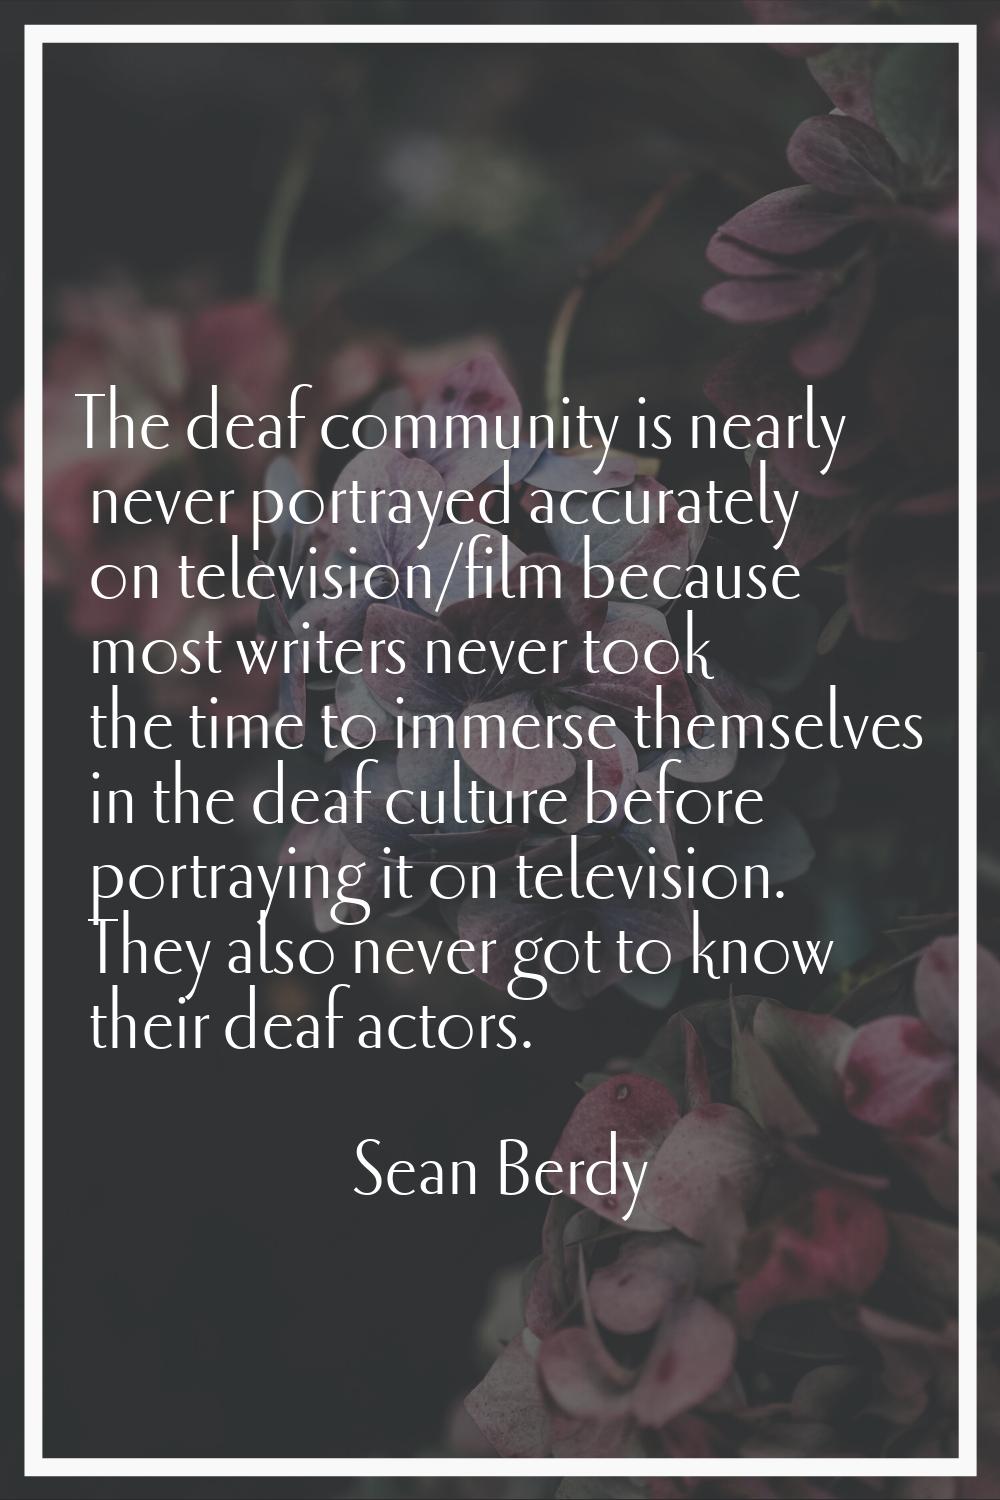 The deaf community is nearly never portrayed accurately on television/film because most writers nev